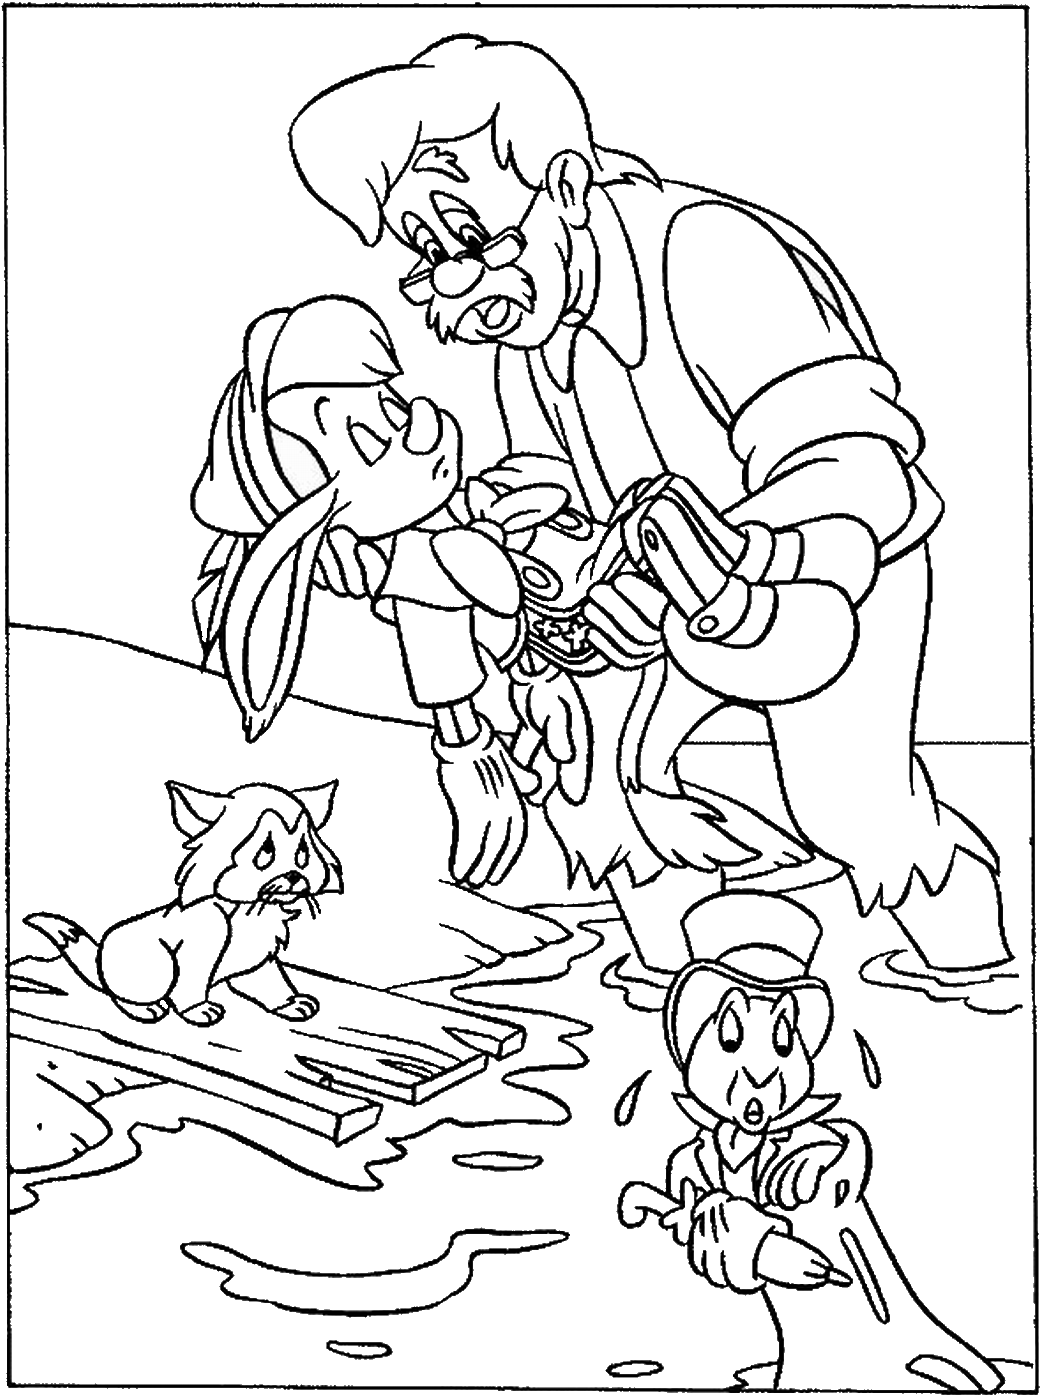 Pinocchio Coloring Pages TV Film Pinocchio_coloring_8 Printable 2020 06338 Coloring4free